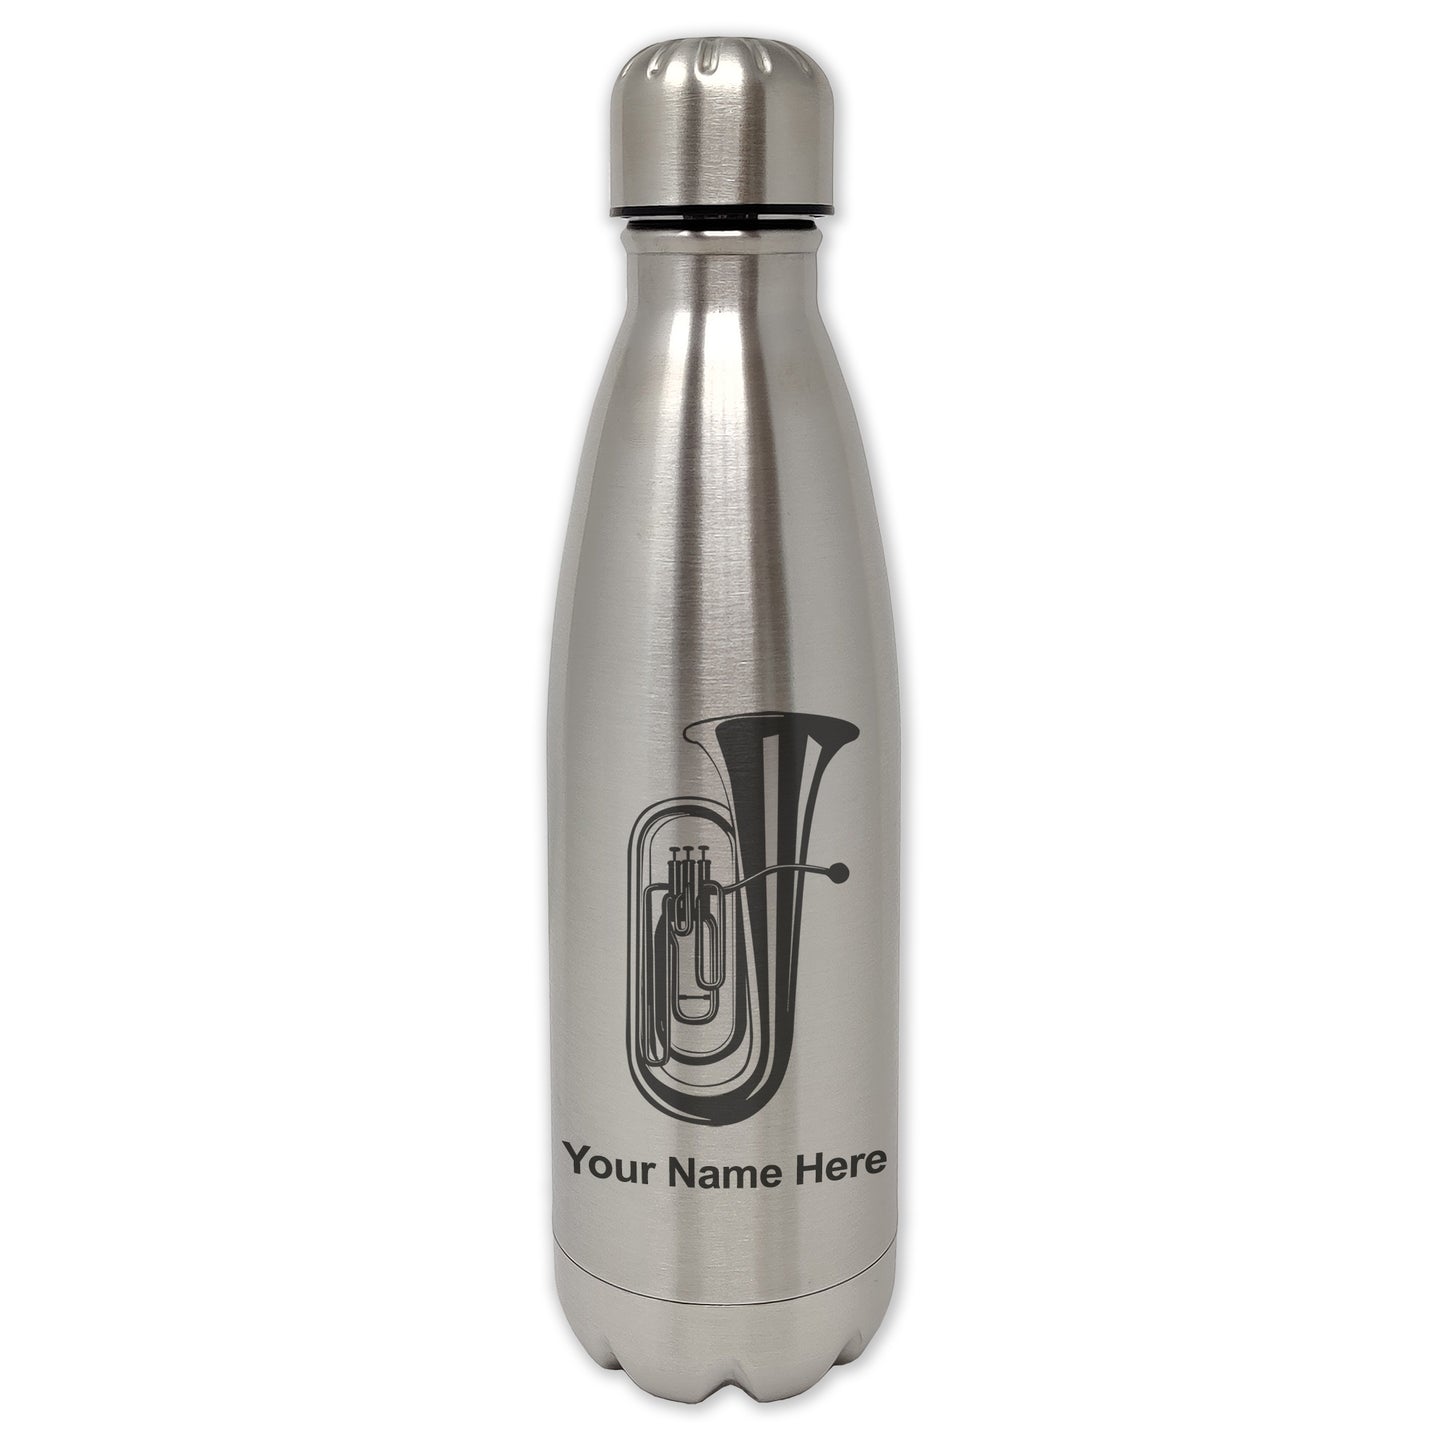 LaserGram Single Wall Water Bottle, Tuba, Personalized Engraving Included